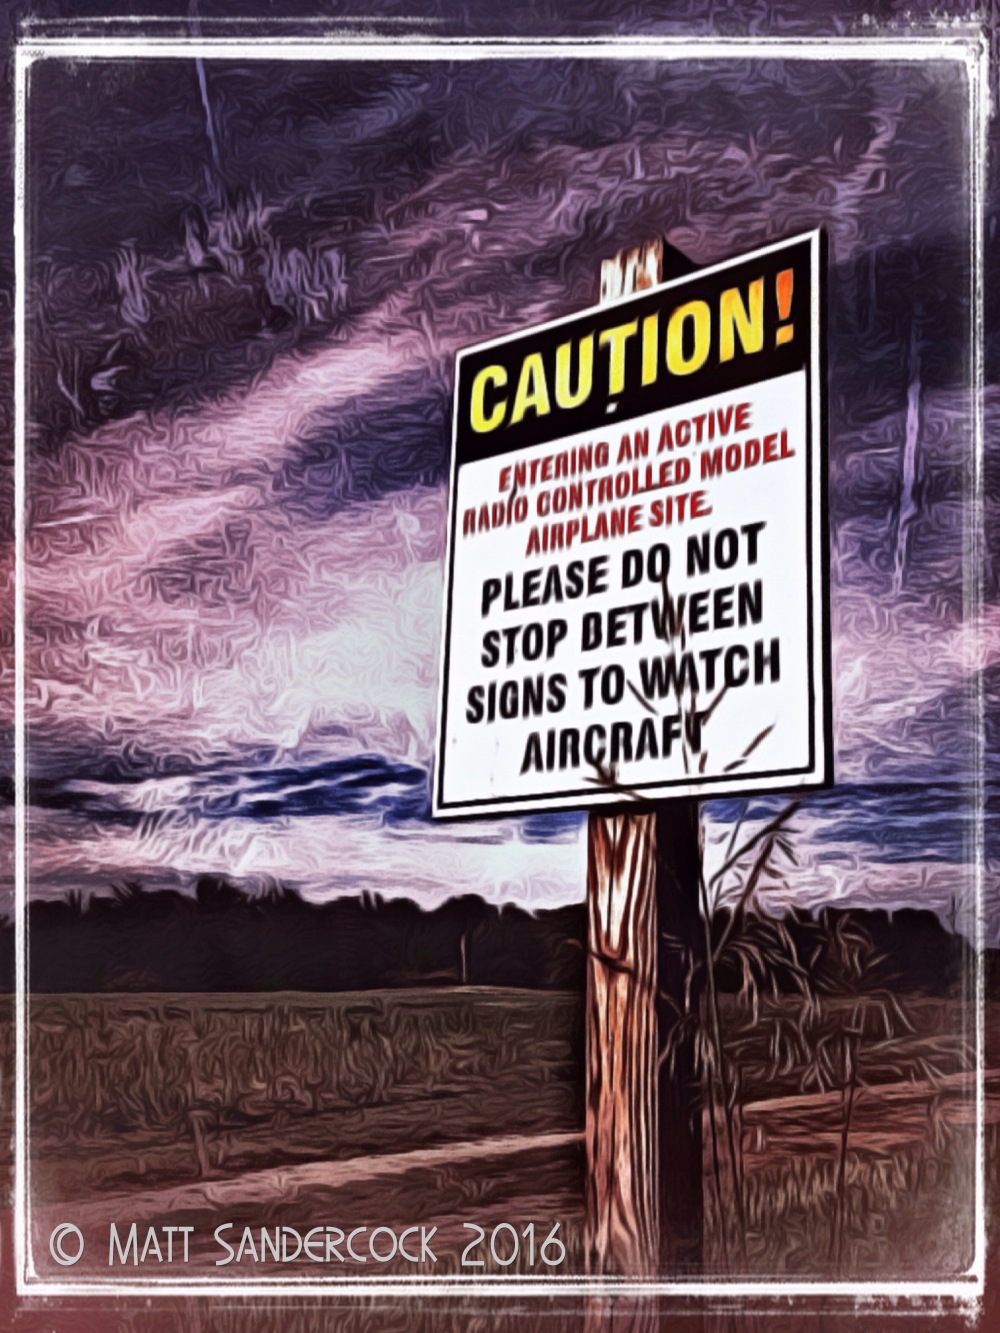 project 366, sign, iColorama, caution, model aircraft, Tom Sawyer Park, Louisville